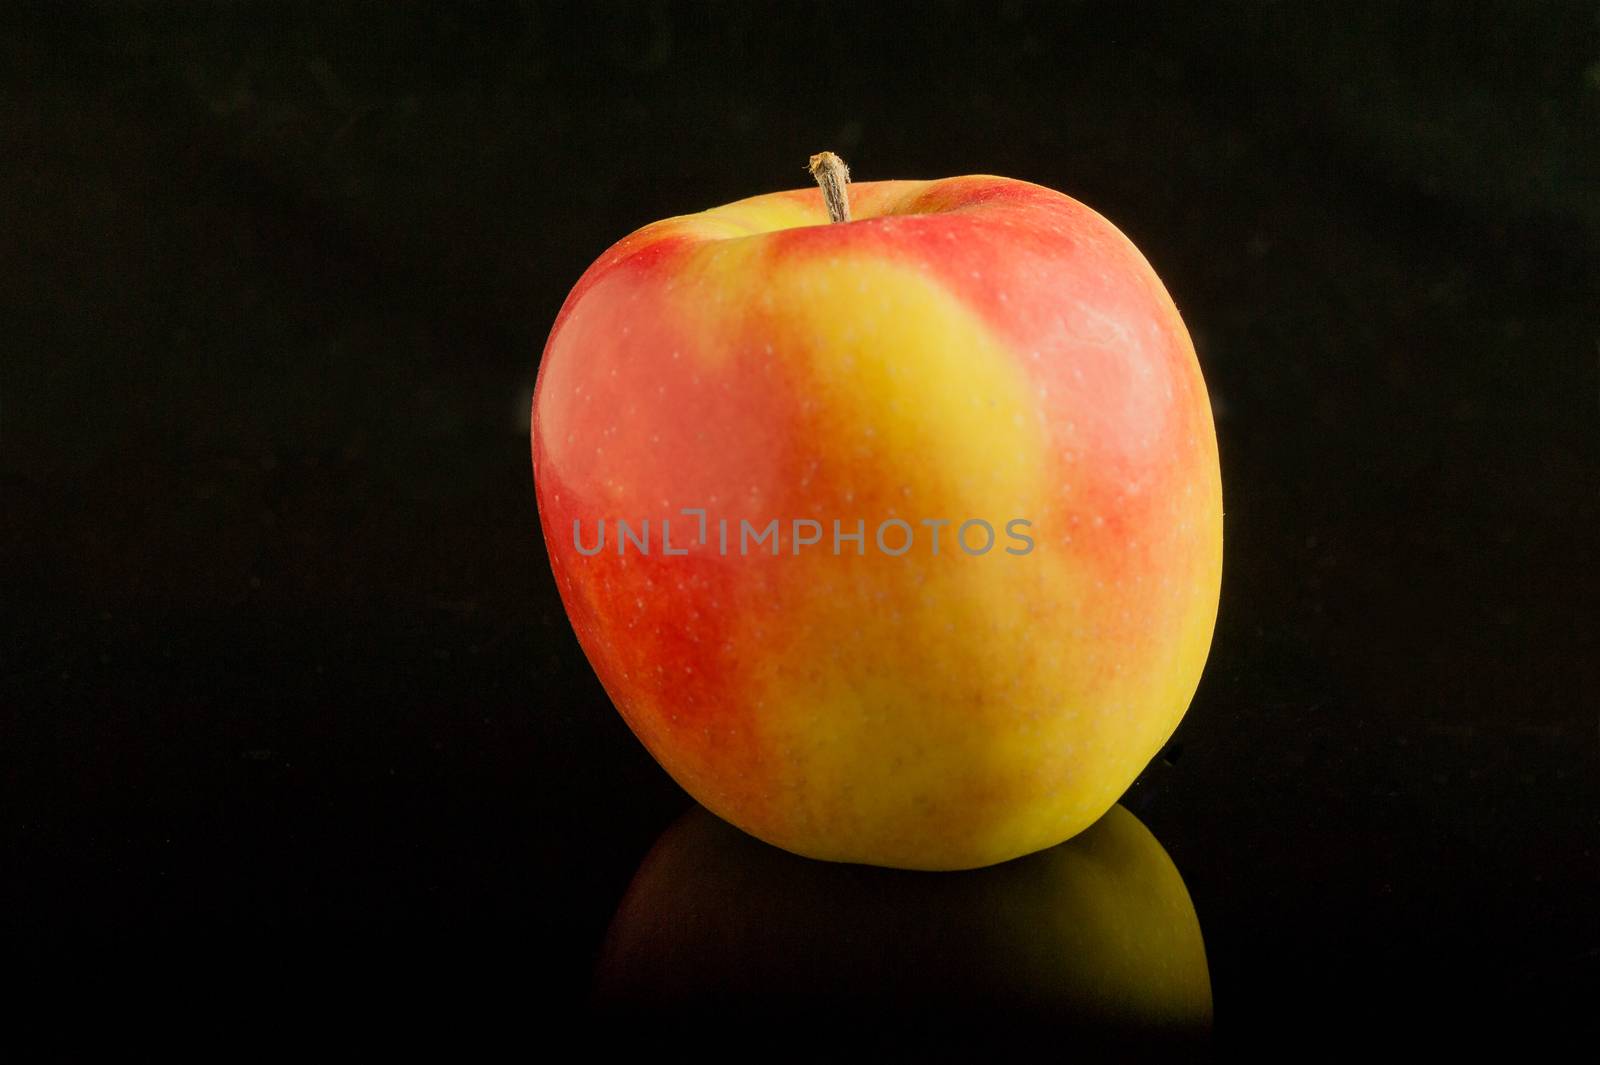 Beautiful yellow-red apple  lie on a black glass table with reflection